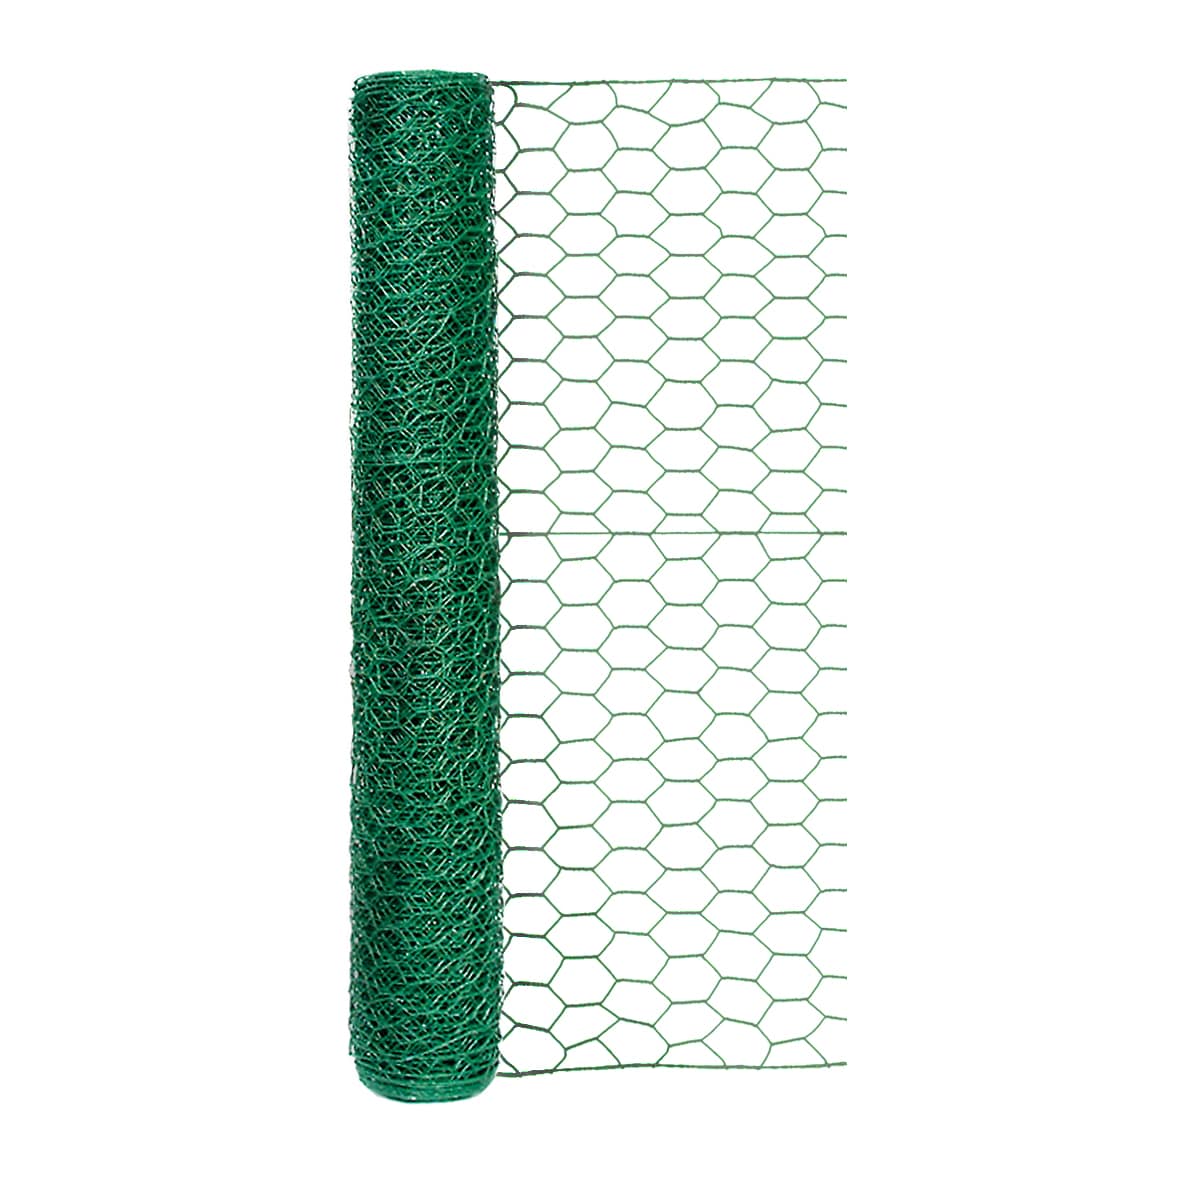 Filter Screen/PP White Plastic Flat Screen/ Poultry Keeping Mesh